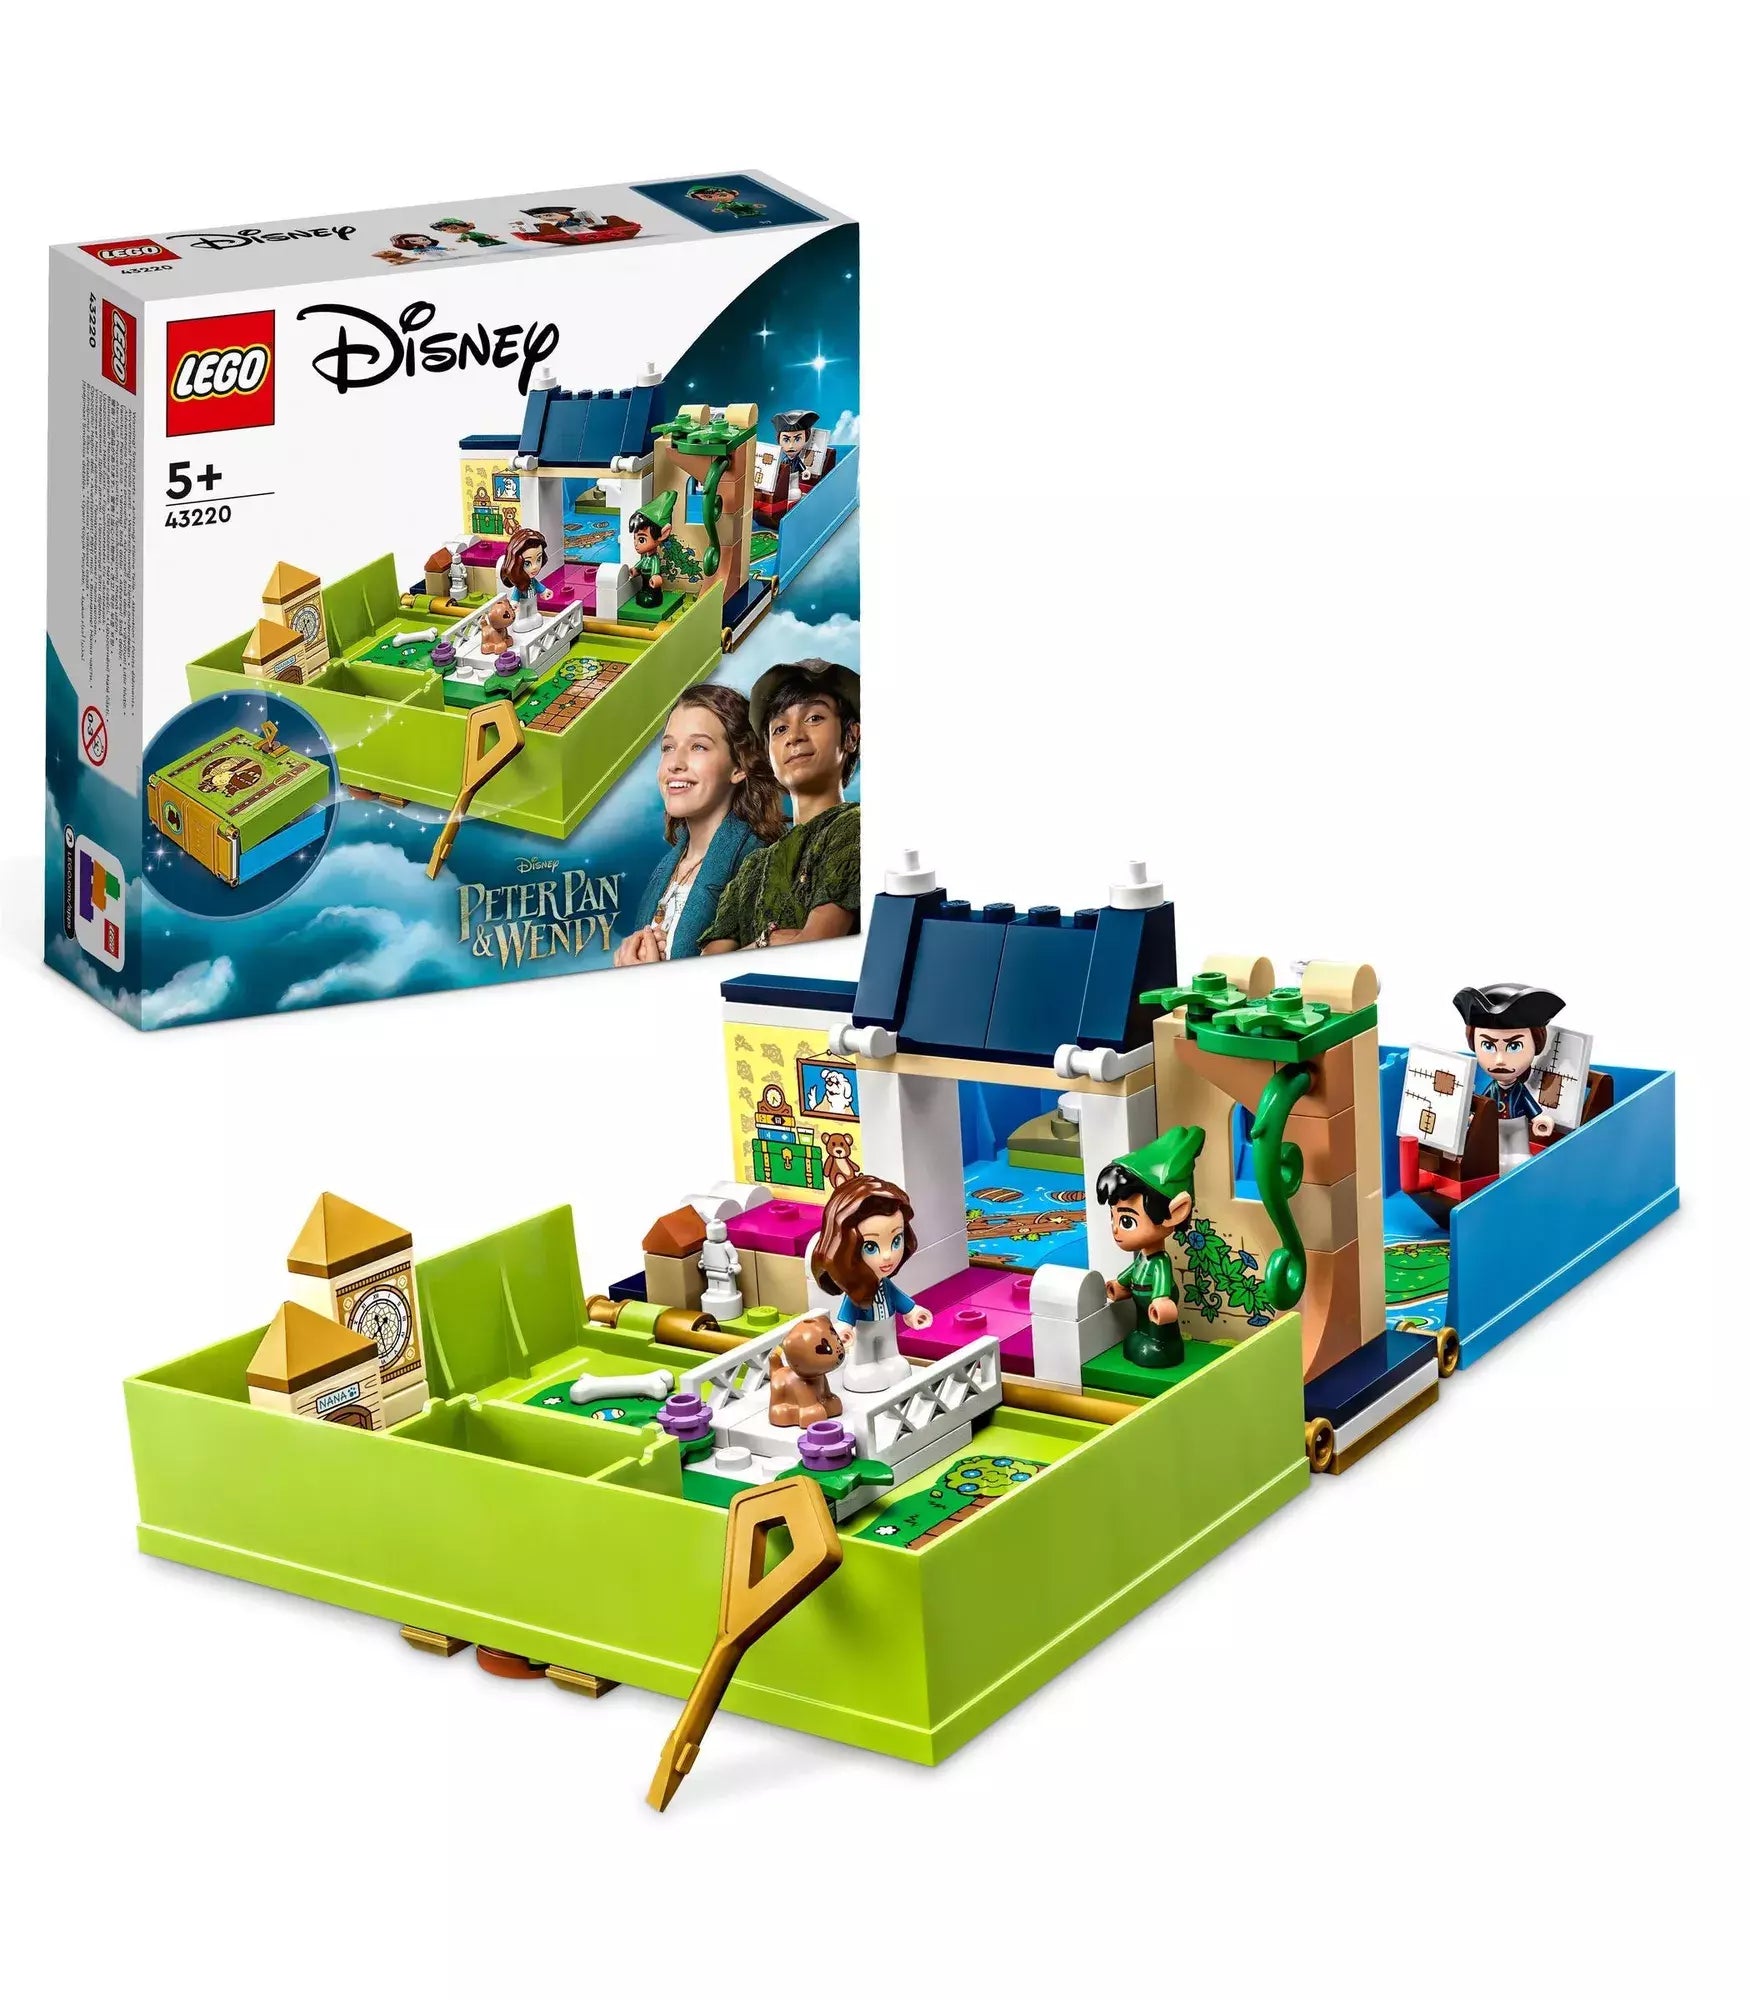 Lego 43220 Disney Peter Pan and Wendy